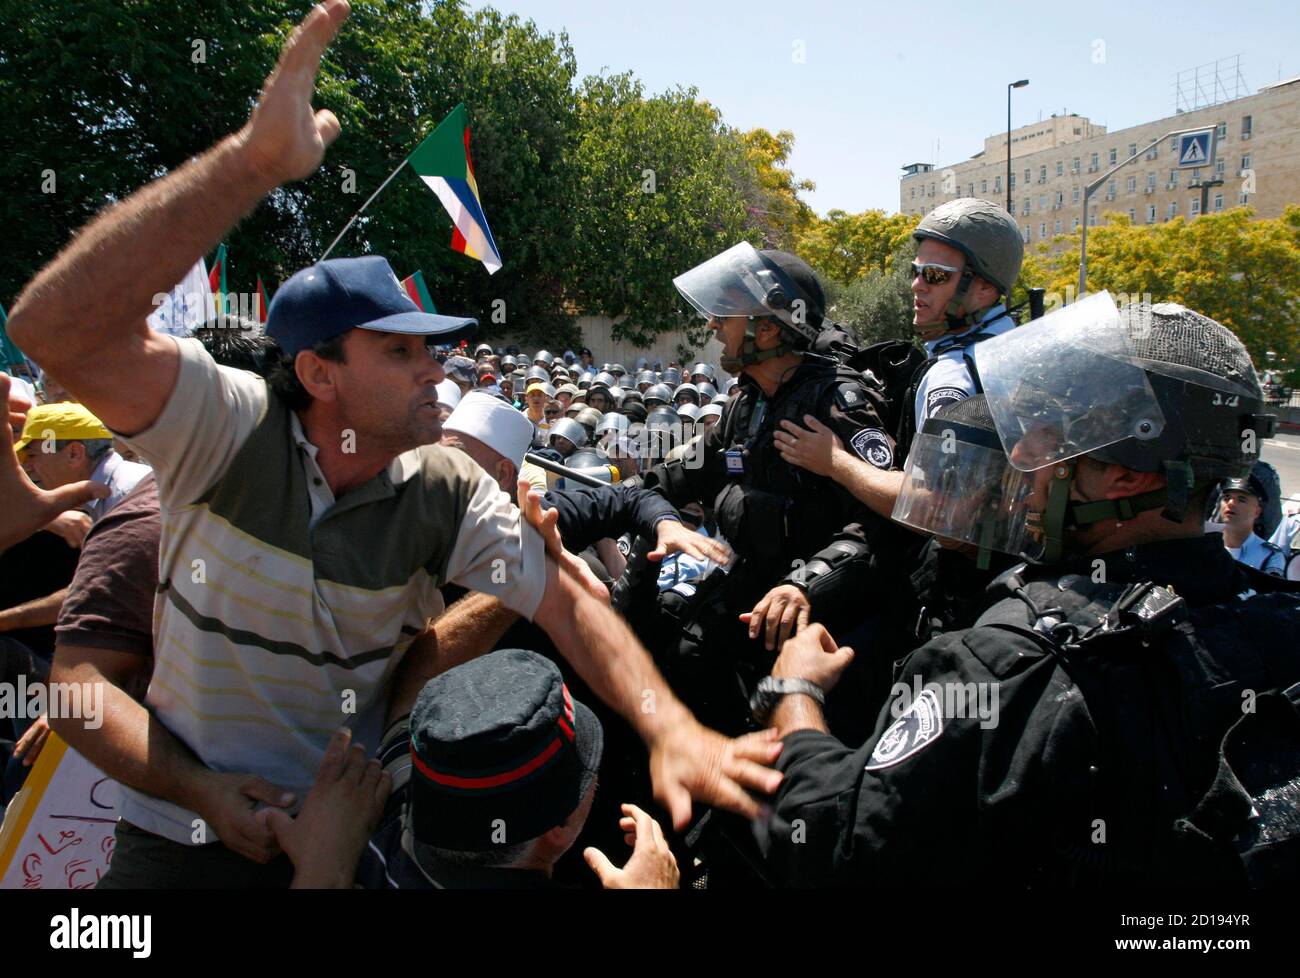 A protester raises his hand towards an Israeli police officer during scuffles in Jerusalem June 21, 2009. Hundreds of Israeli Druze and Circassians held a protest outside the Prime Minister's office in Jerusalem on Sunday against what they call unequal government funding for their communities. REUTERS/Baz Ratner (JERUSALEM POLITICS CONFLICT IMAGES OF THE DAY) Stock Photo